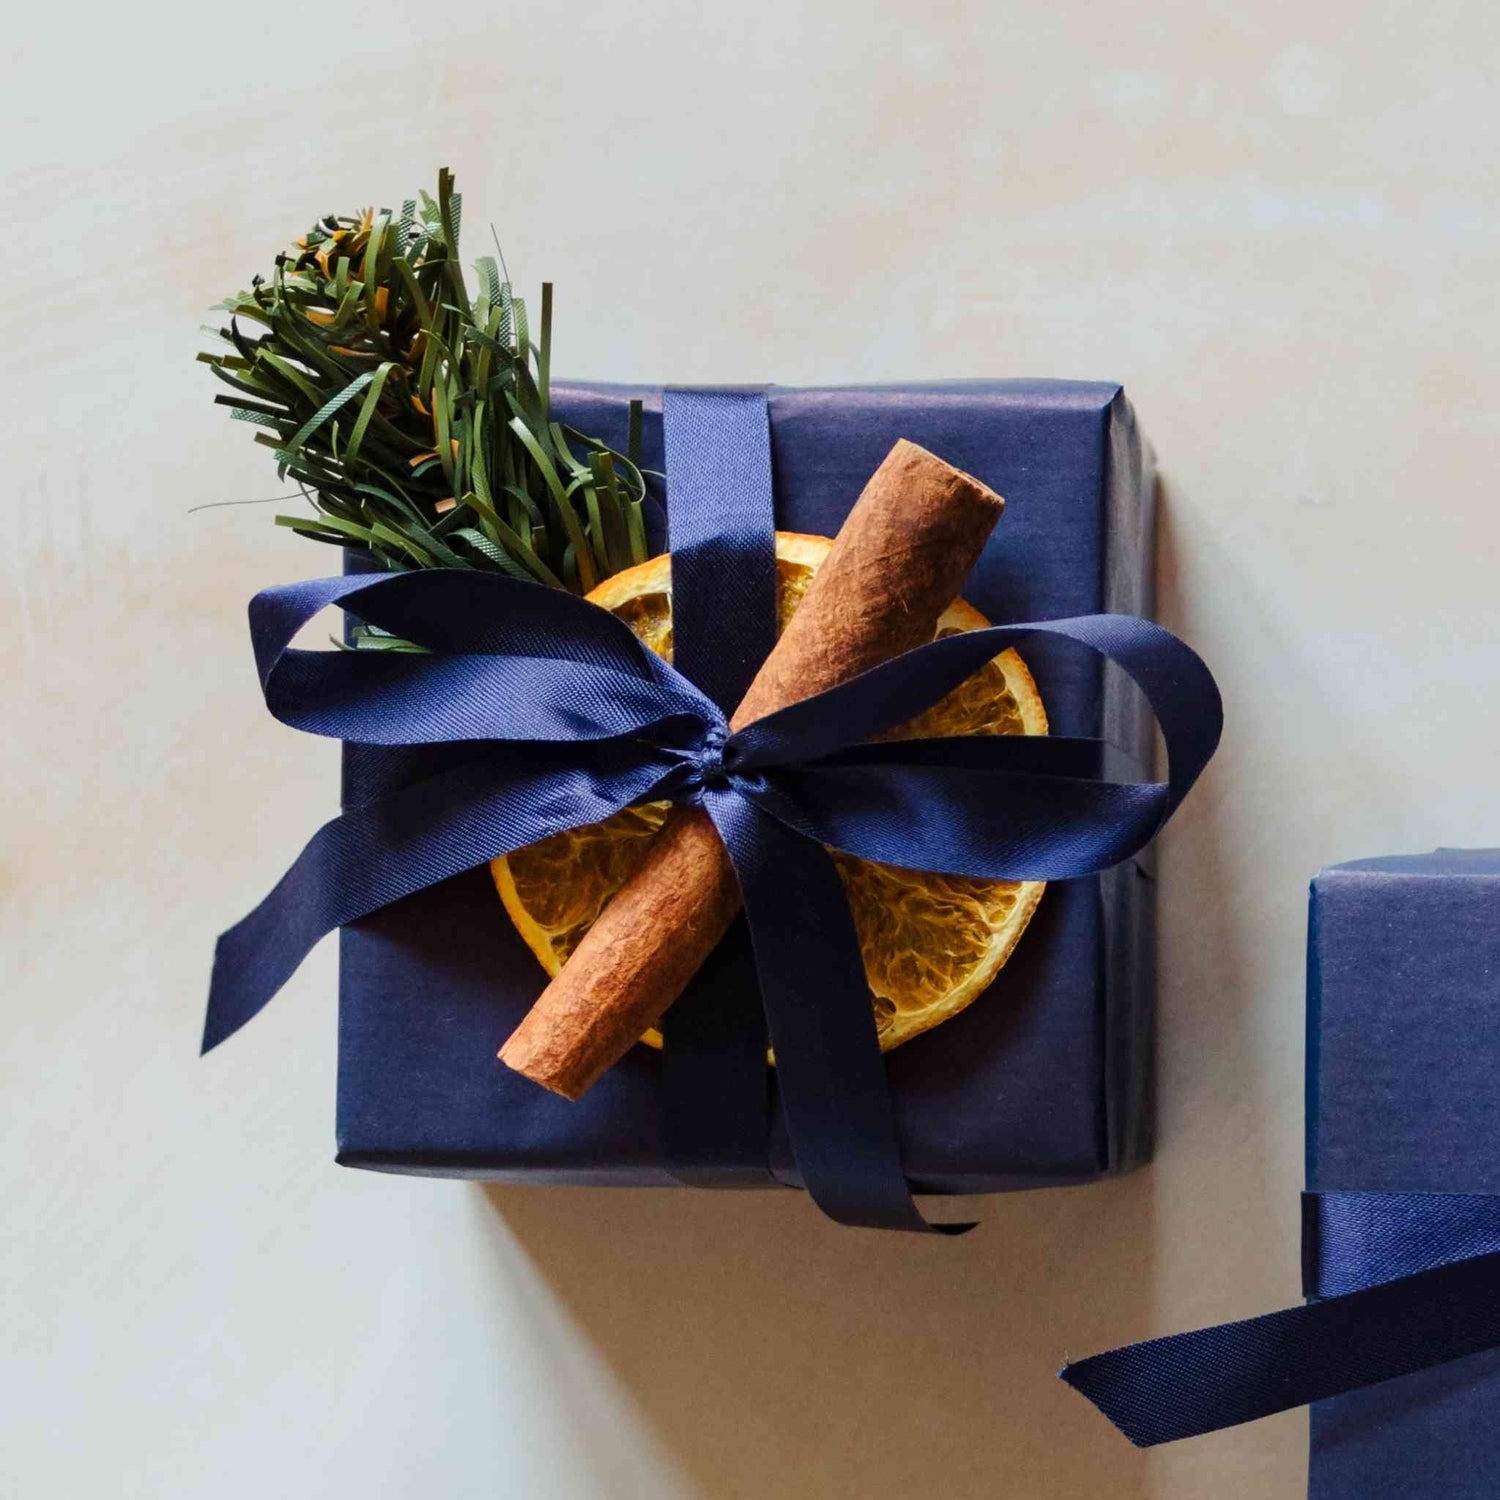 A 200g woody soy candle from the Home County Co. is shown with luxury Christmas Gift Wrap. The candle is wrapped in luxury navy wrapping paper secured with navy ribbon and Christmas embellishments.